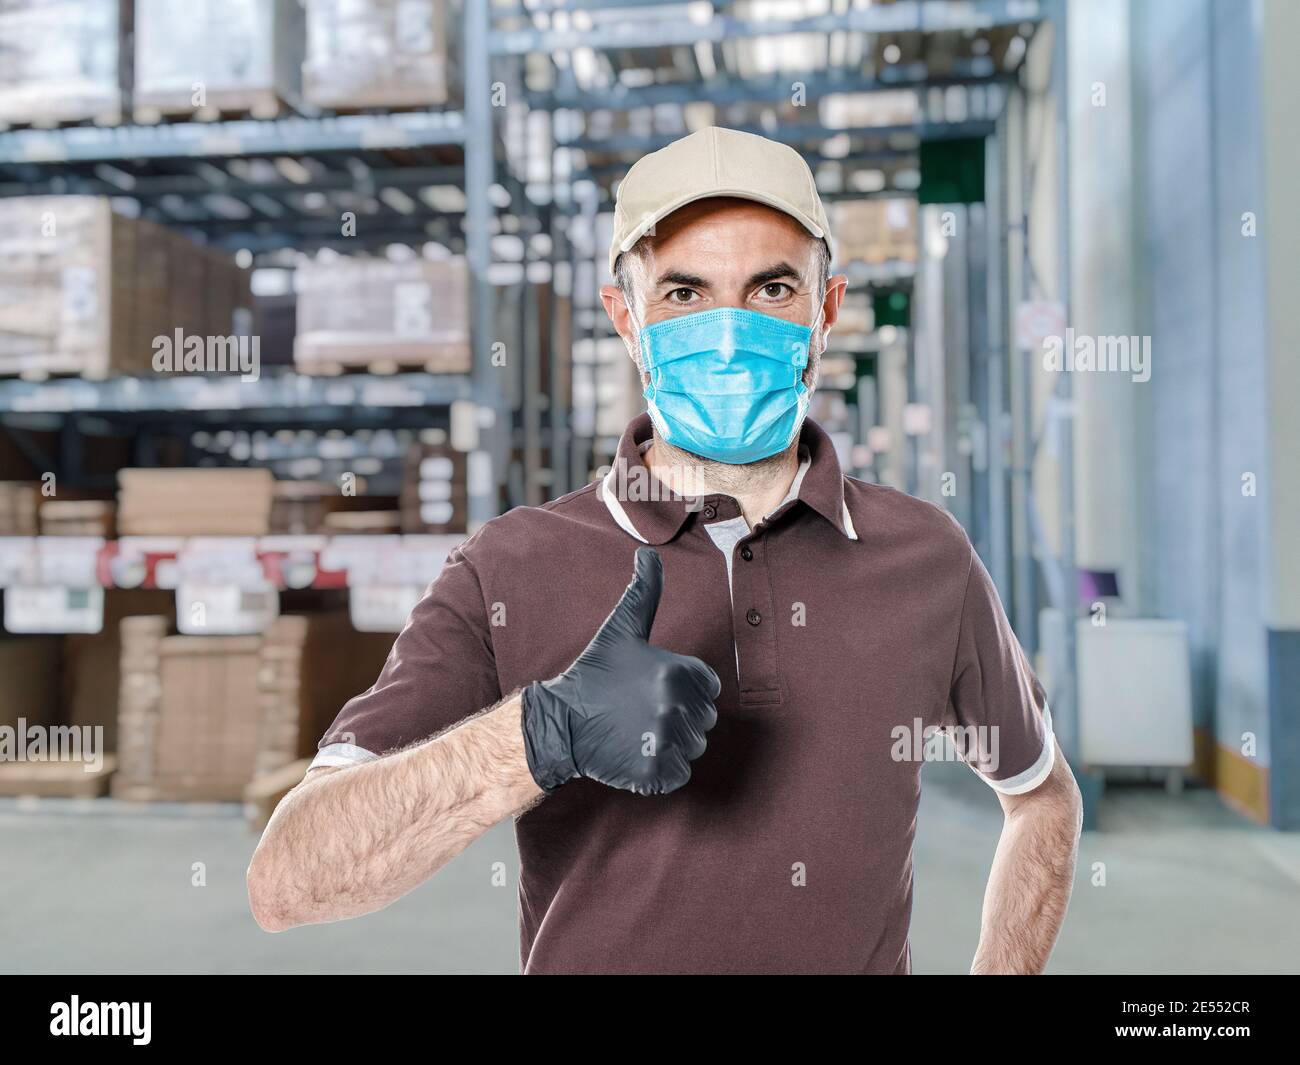 delivery man with uniform and protective mask for covid-19 inside a warehouse. Safe shipping concept. Stock Photo